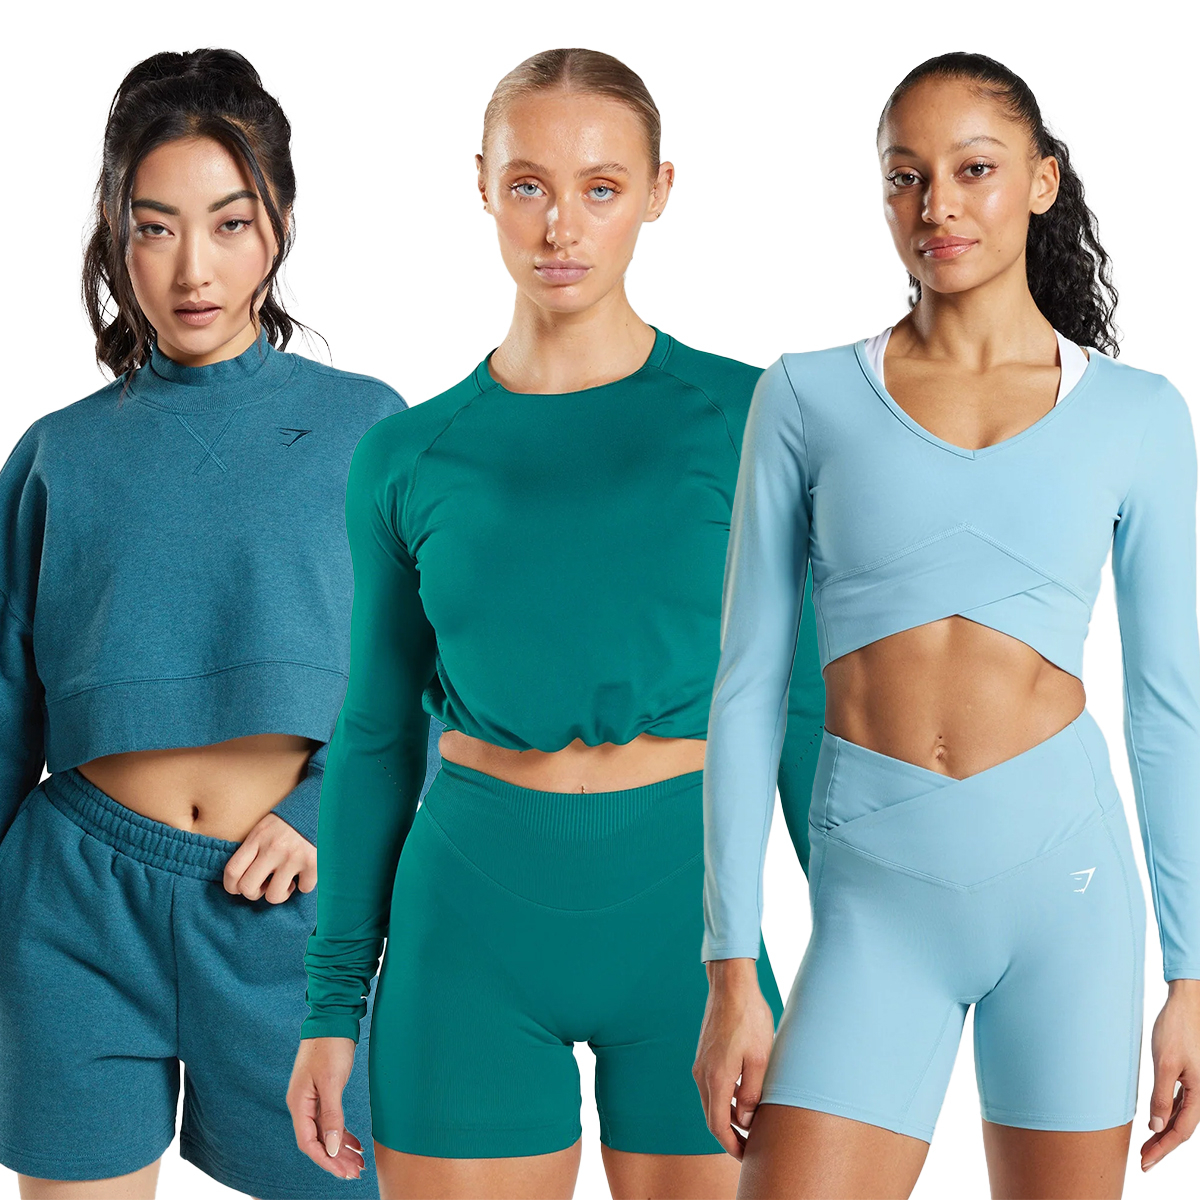 Gymshark kicks off huge sale with up to 60% off items - here are